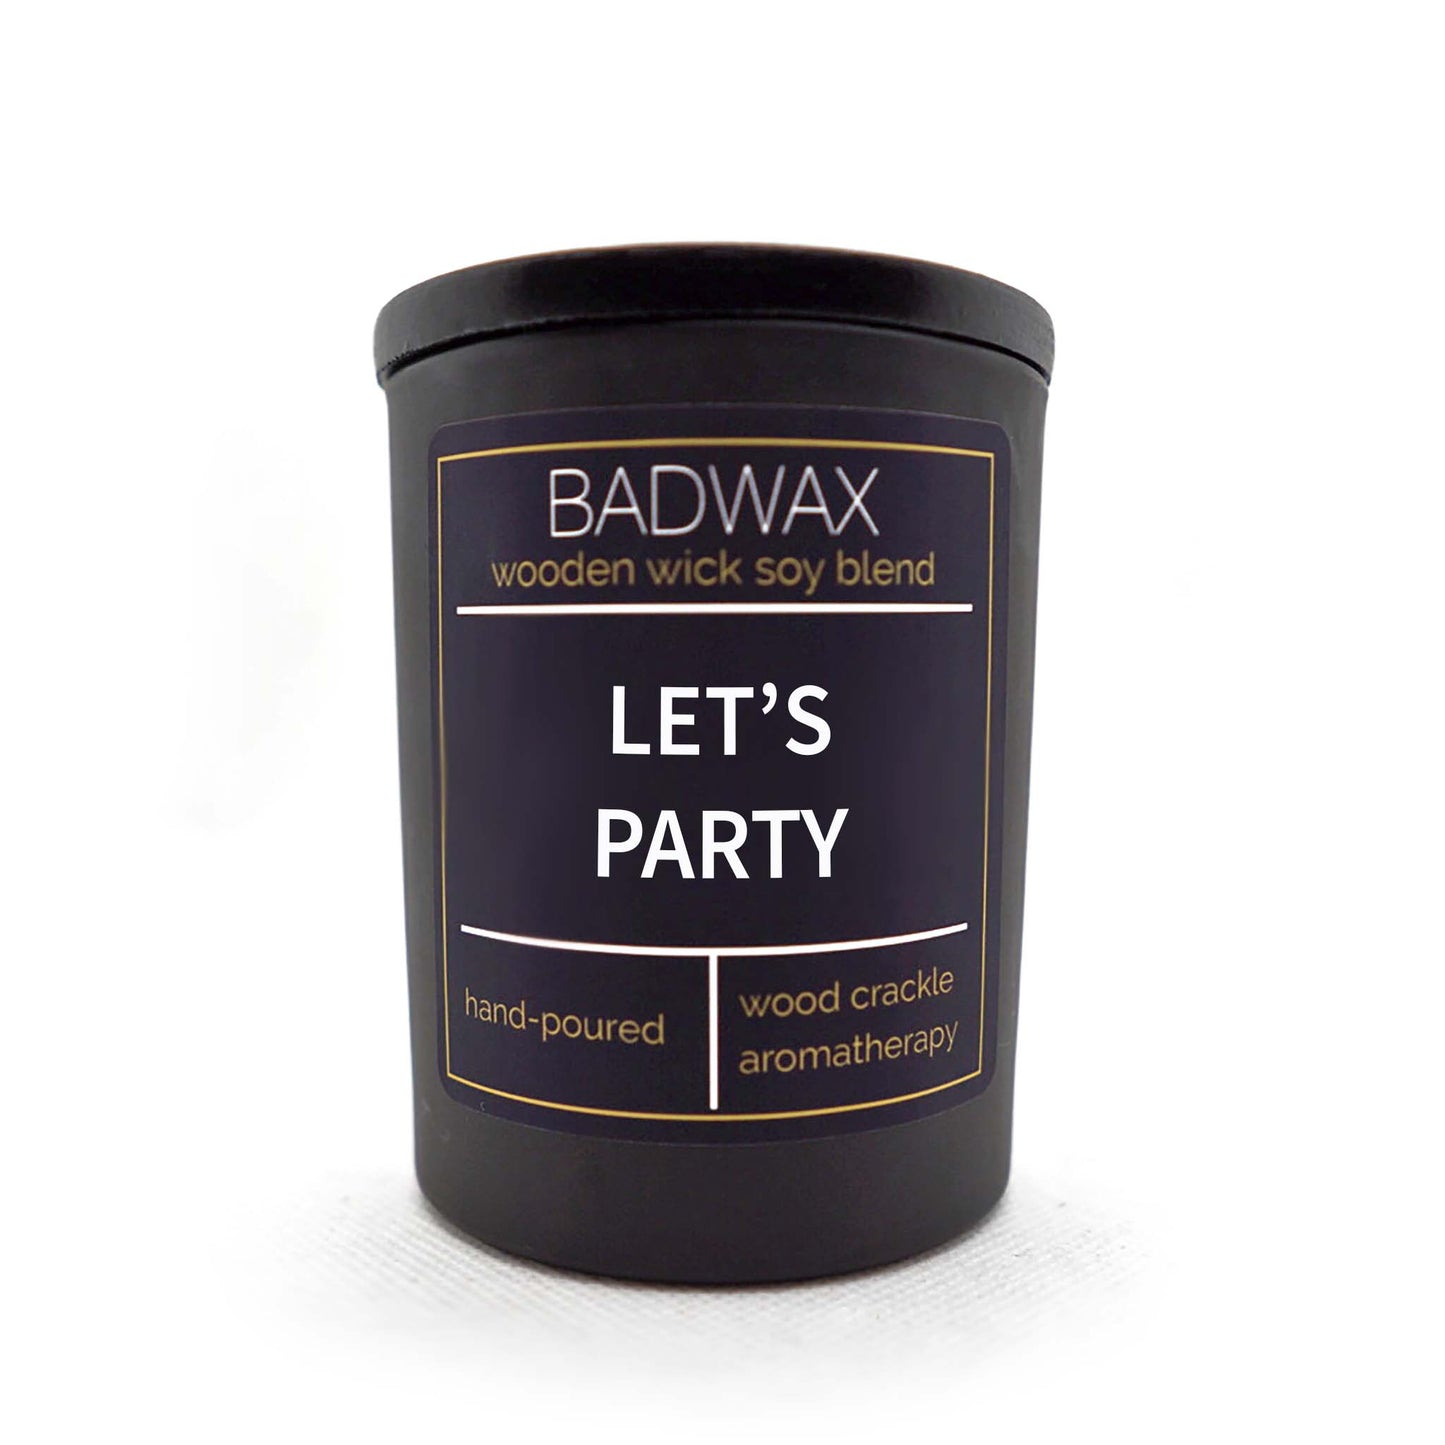 Let's Party - Woodwick Candle